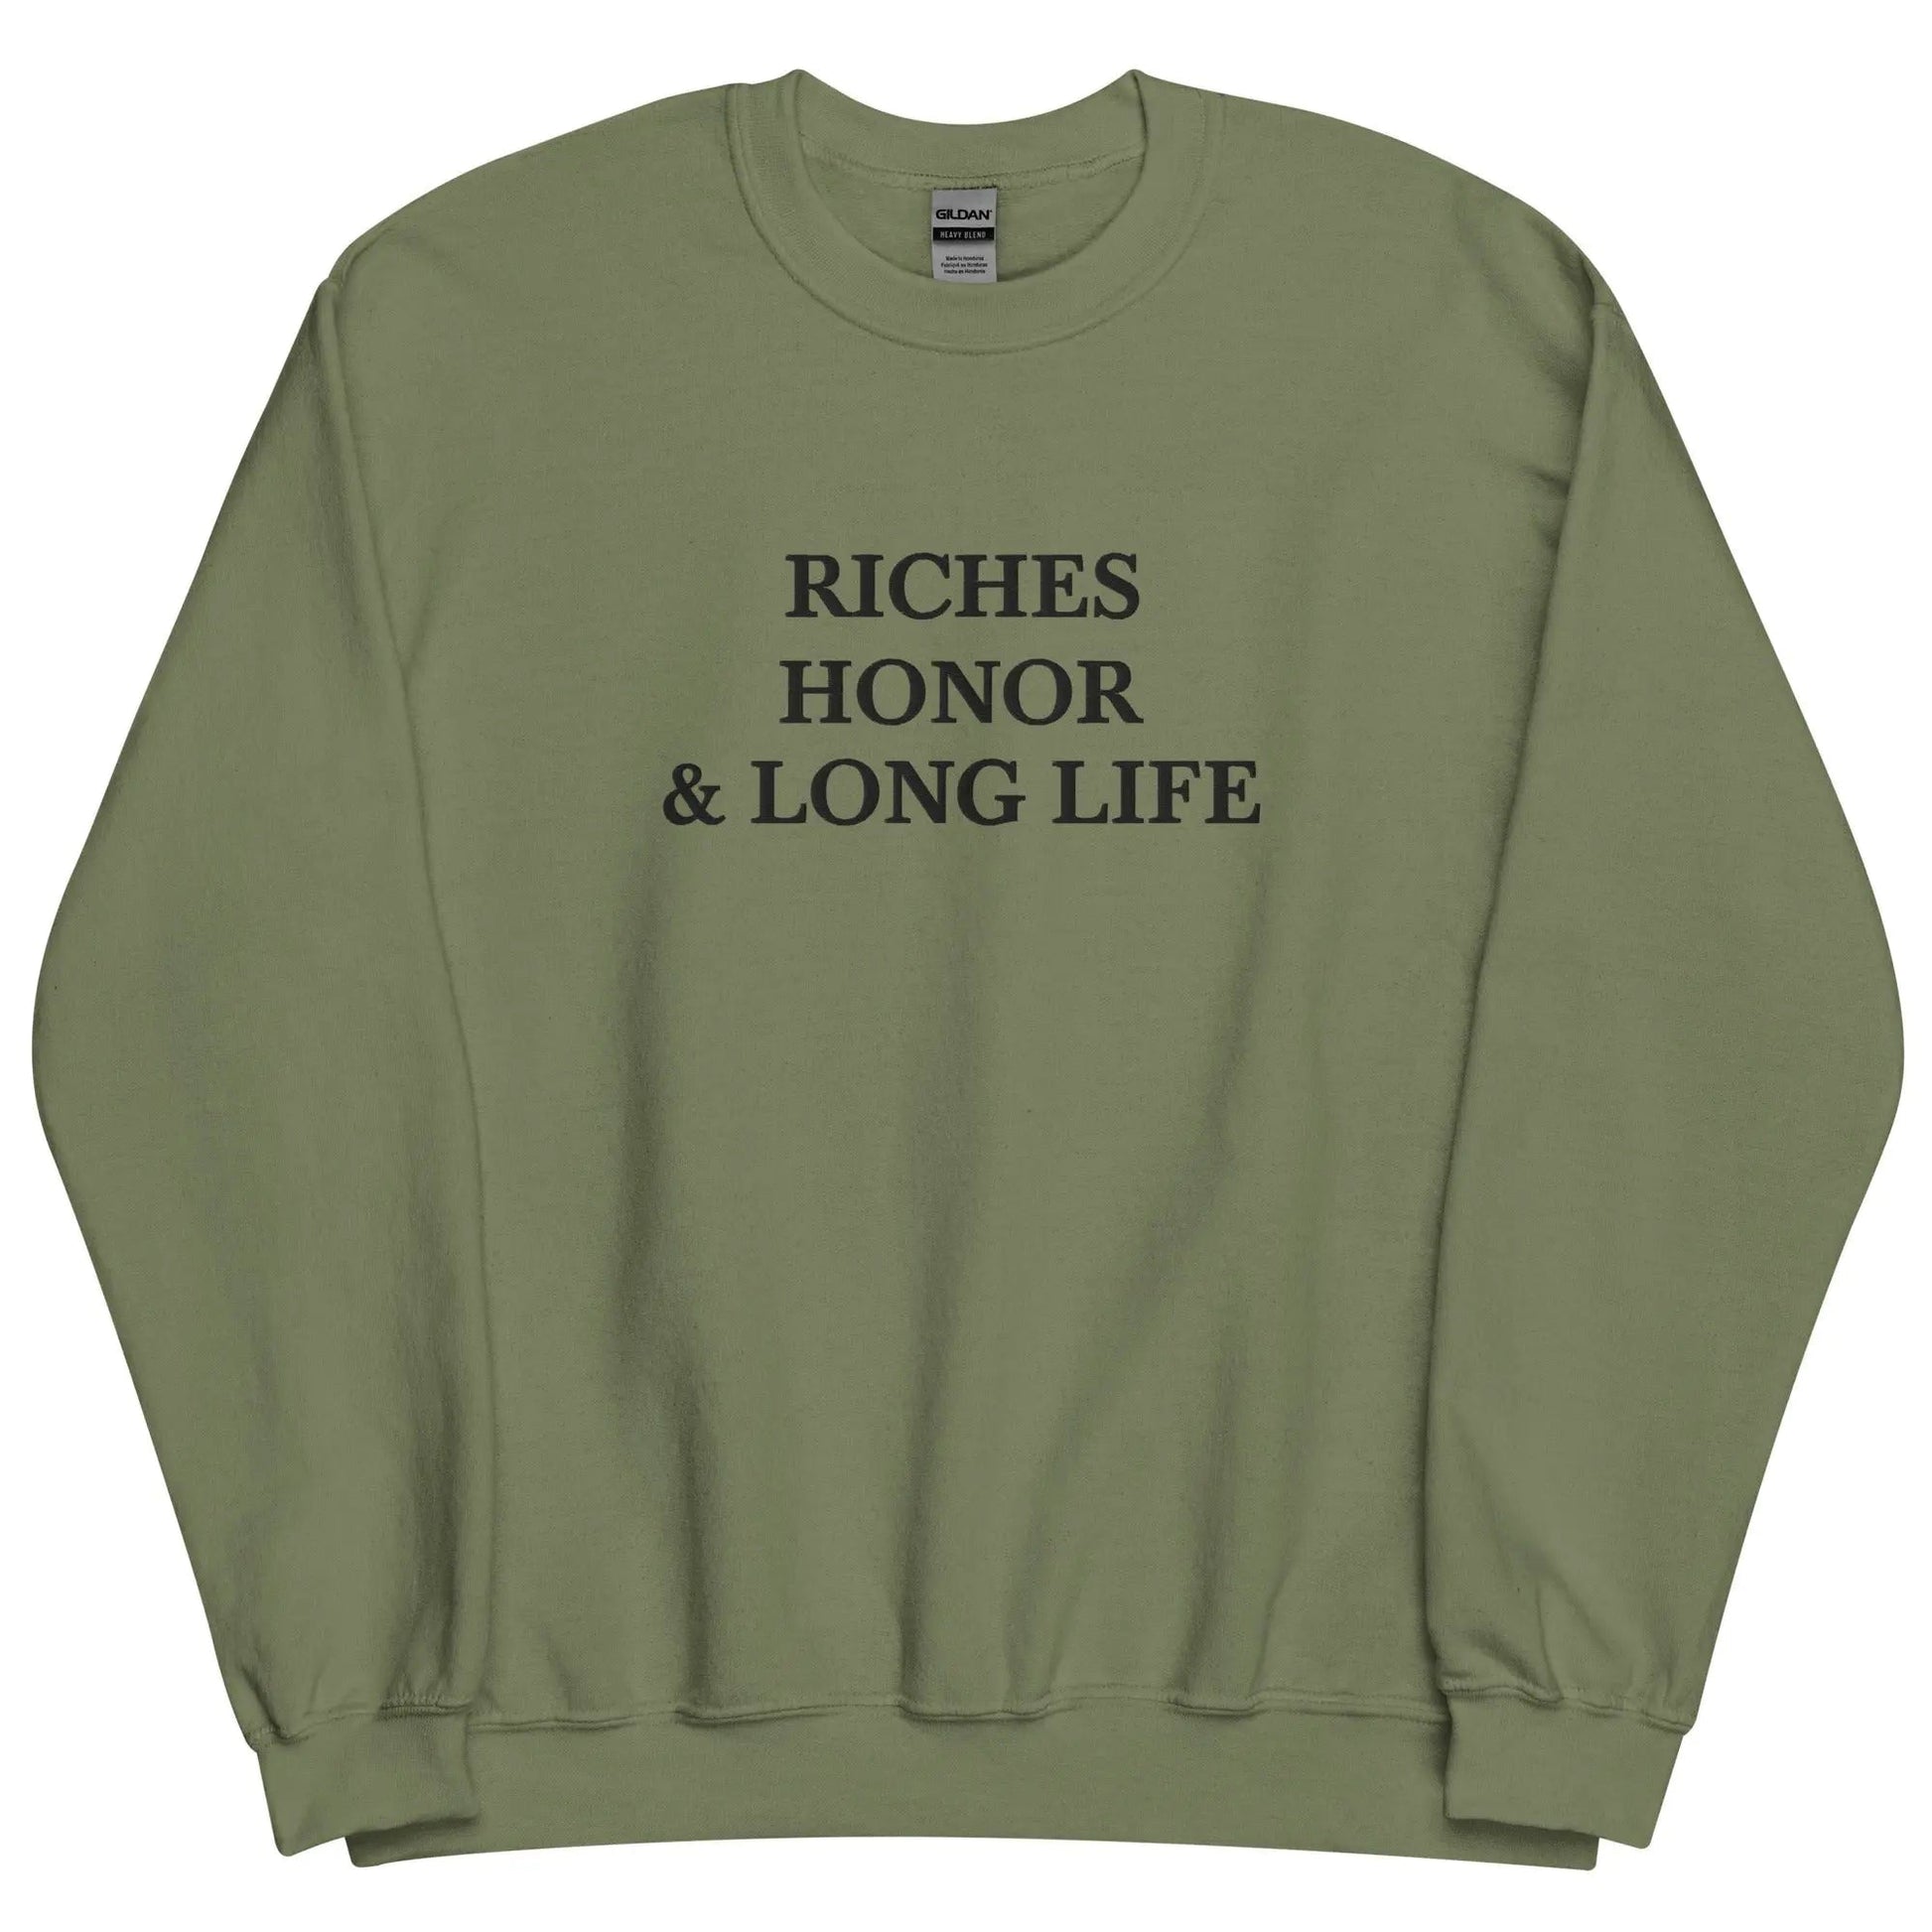 Embroidered Riches Honor & Long Life Crewneck Sweatshirt-clothes- sweater-Military Green-S-mysticalcherry